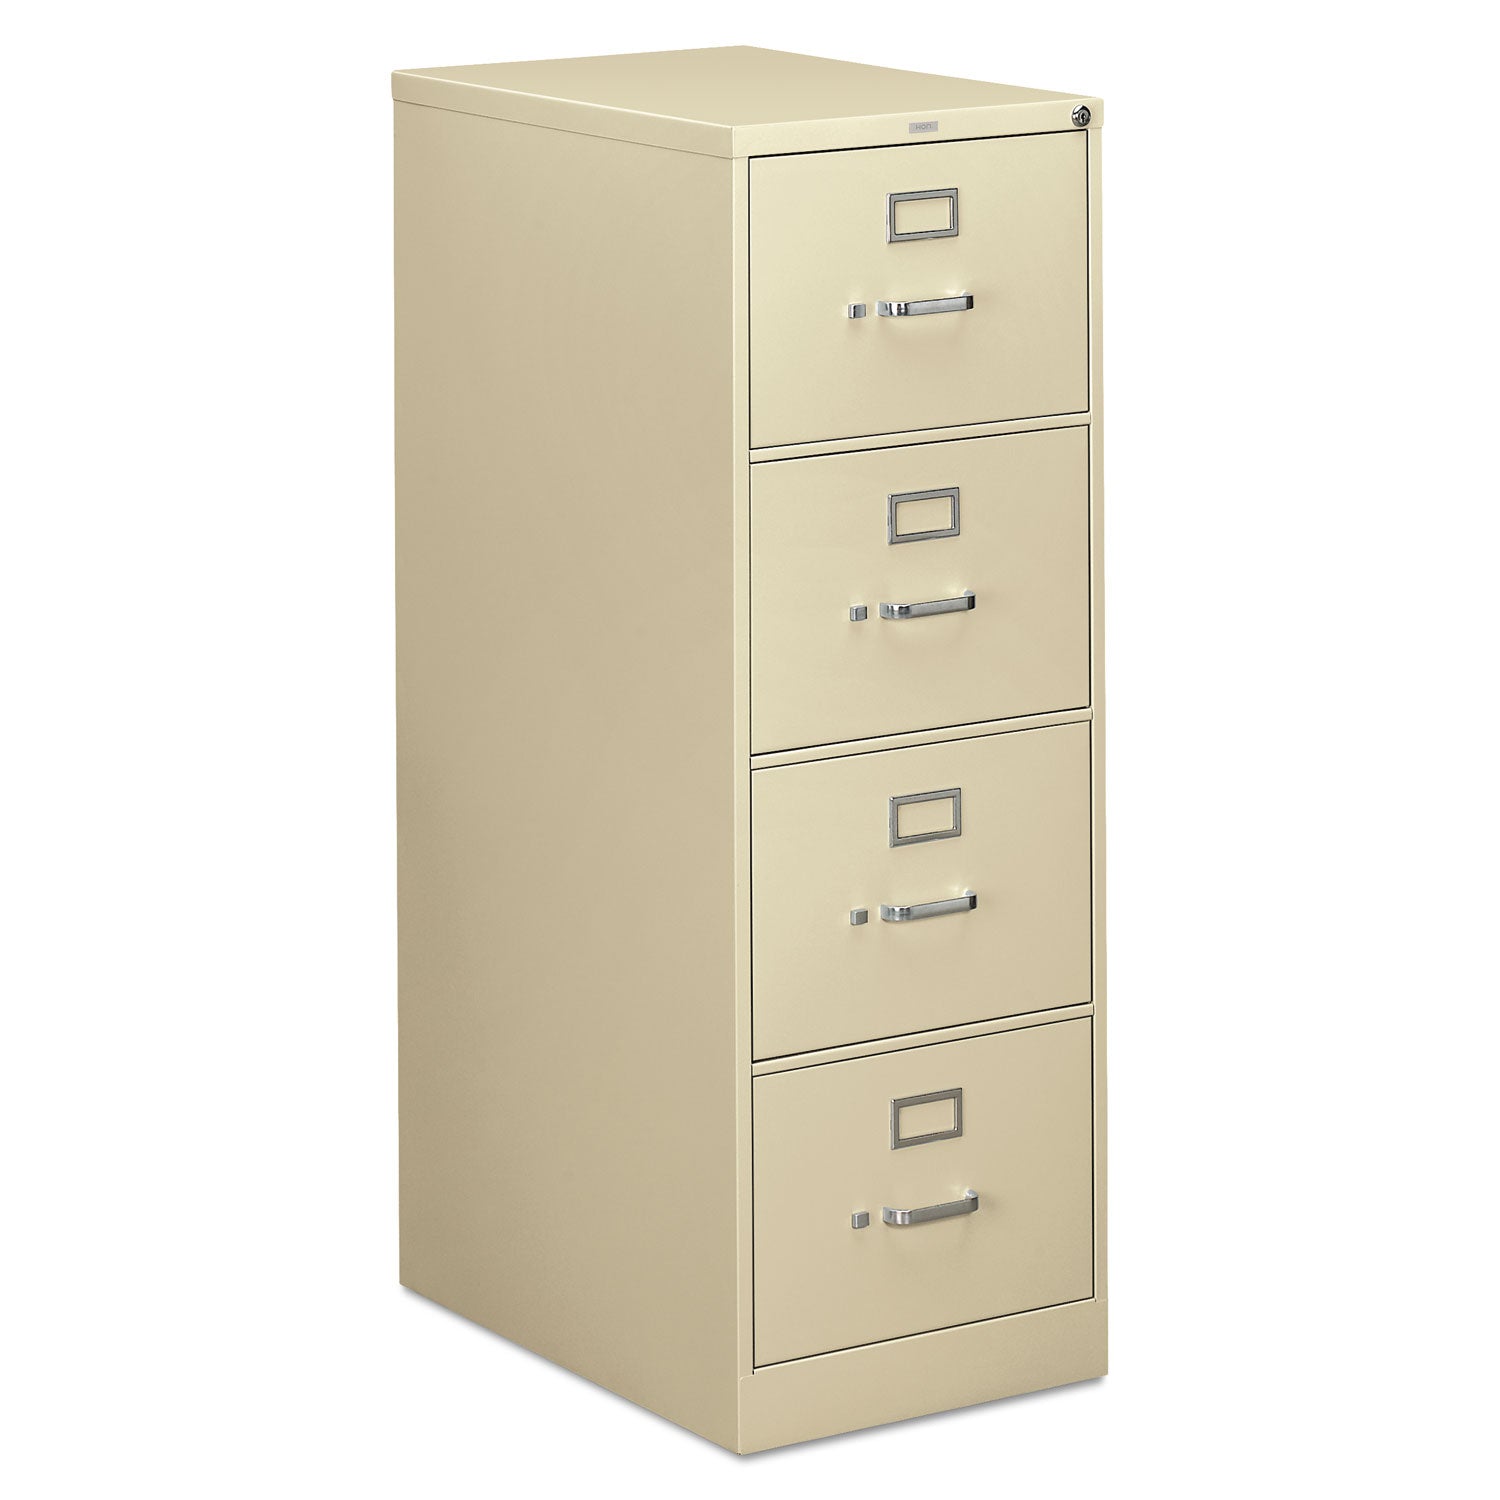 310 Series Vertical File, 4 Legal-Size File Drawers, Putty, 18.25" x 26.5" x 52 - 